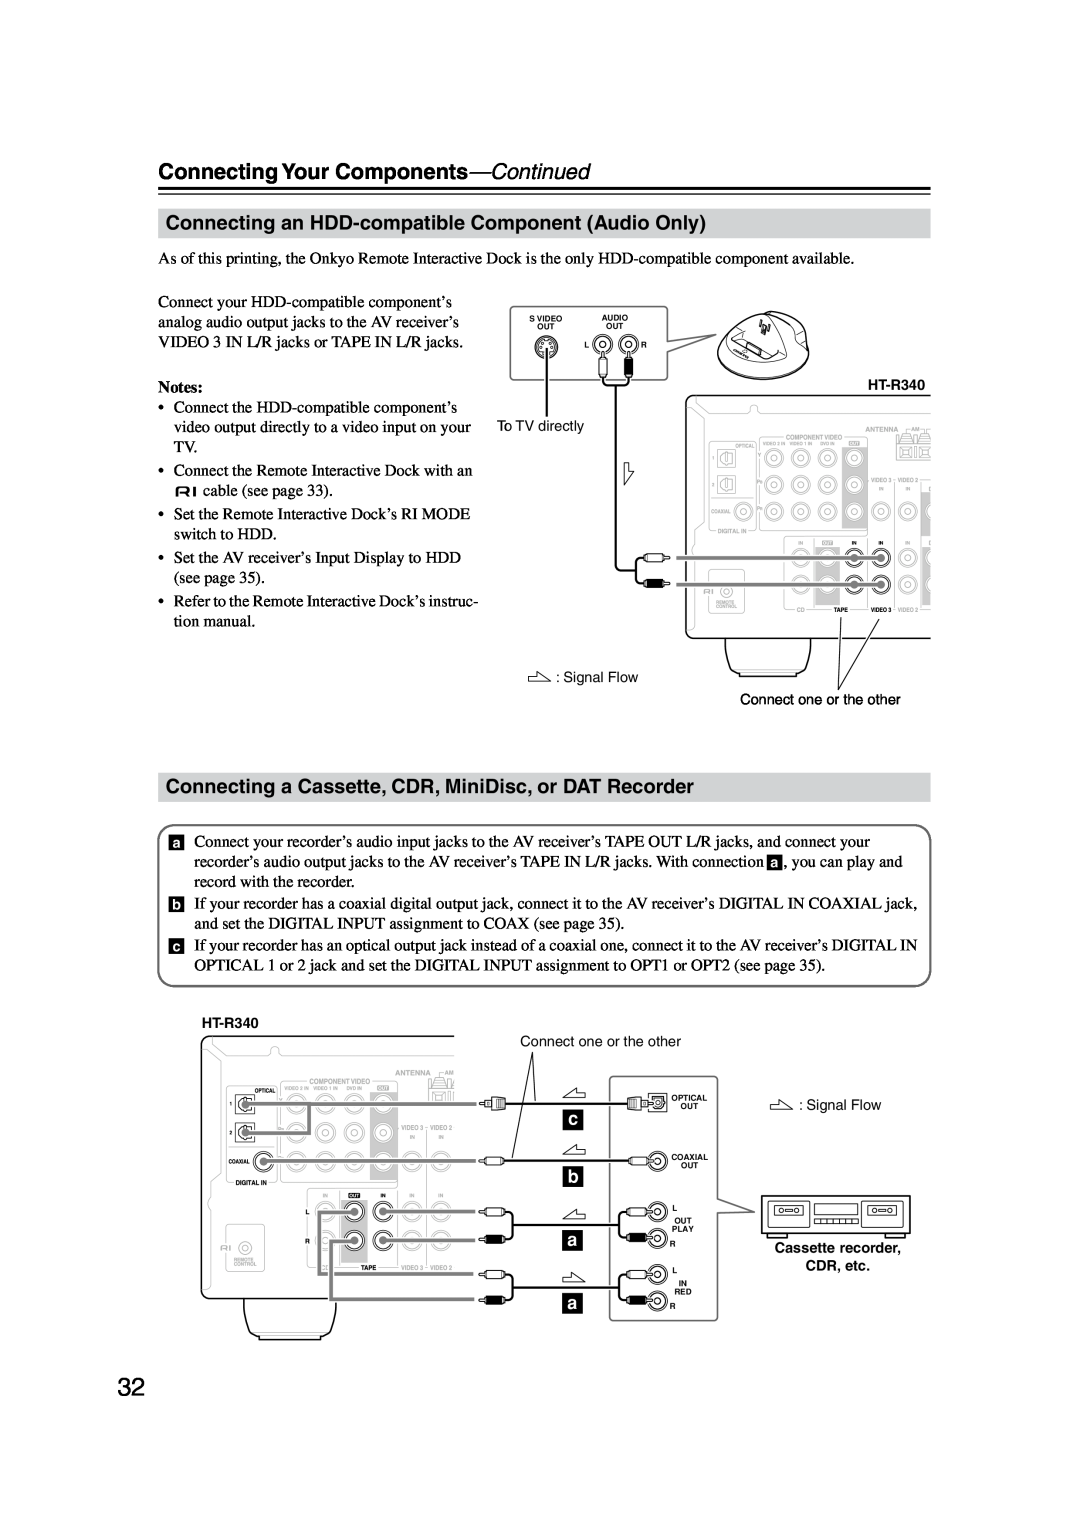 Onkyo HT-S590 instruction manual Connecting an HDD-compatibleComponent Audio Only, Connecting Your Components-Continued 